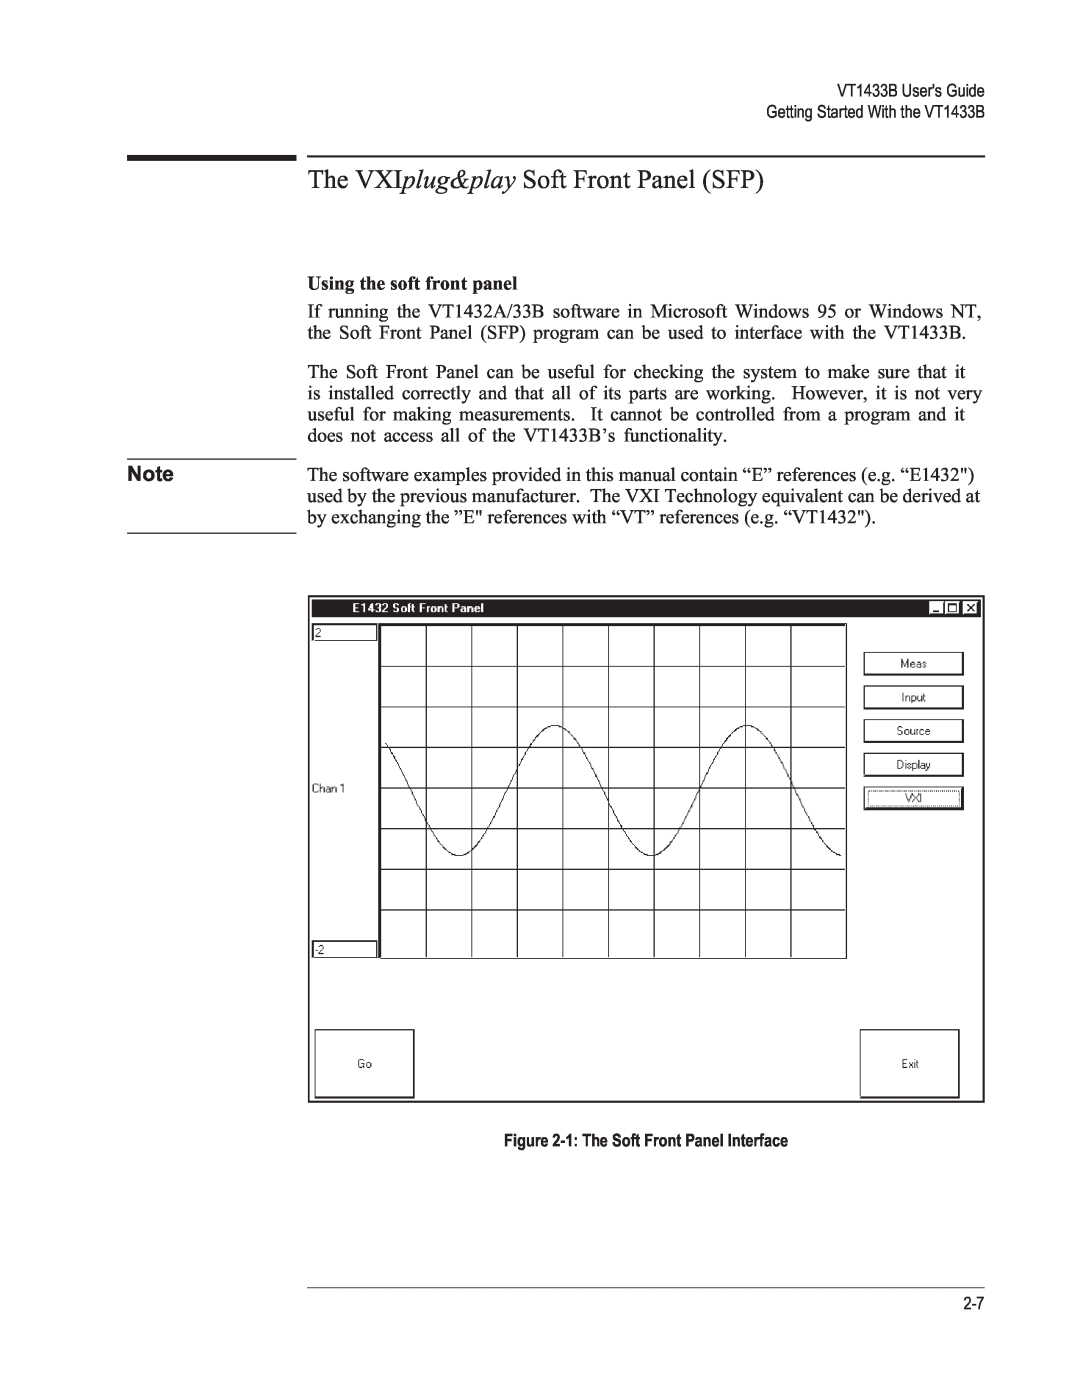 VXI VT1433B manual The VXIplug&play Soft Front Panel SFP, Using the soft front panel 